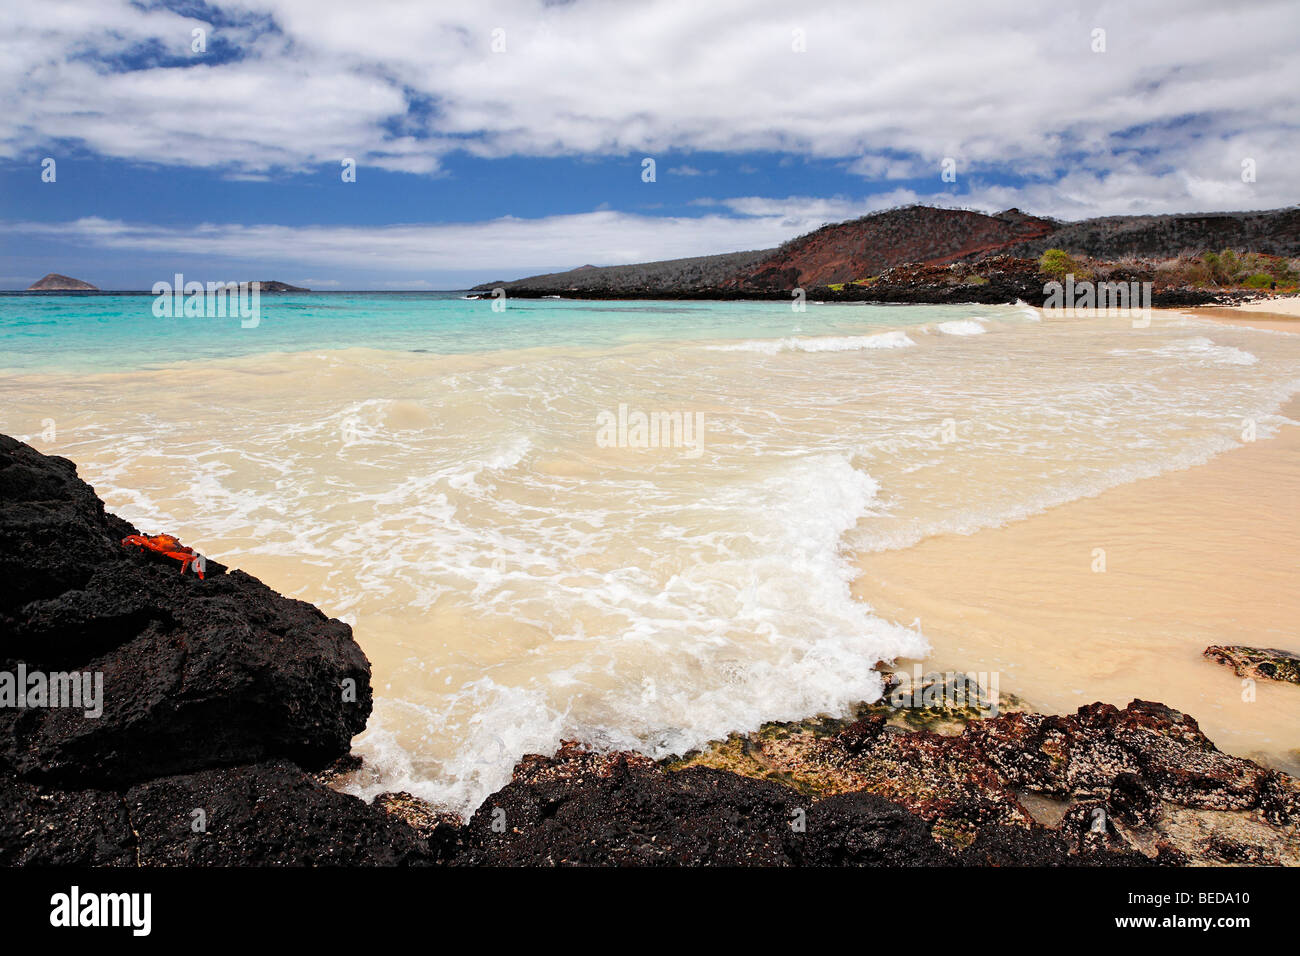 Beach with small waves, Red Rock Crab (Grapsus grapsus) and an island on the horizon, Punta Cormorant, Floreana Island, Galapag Stock Photo